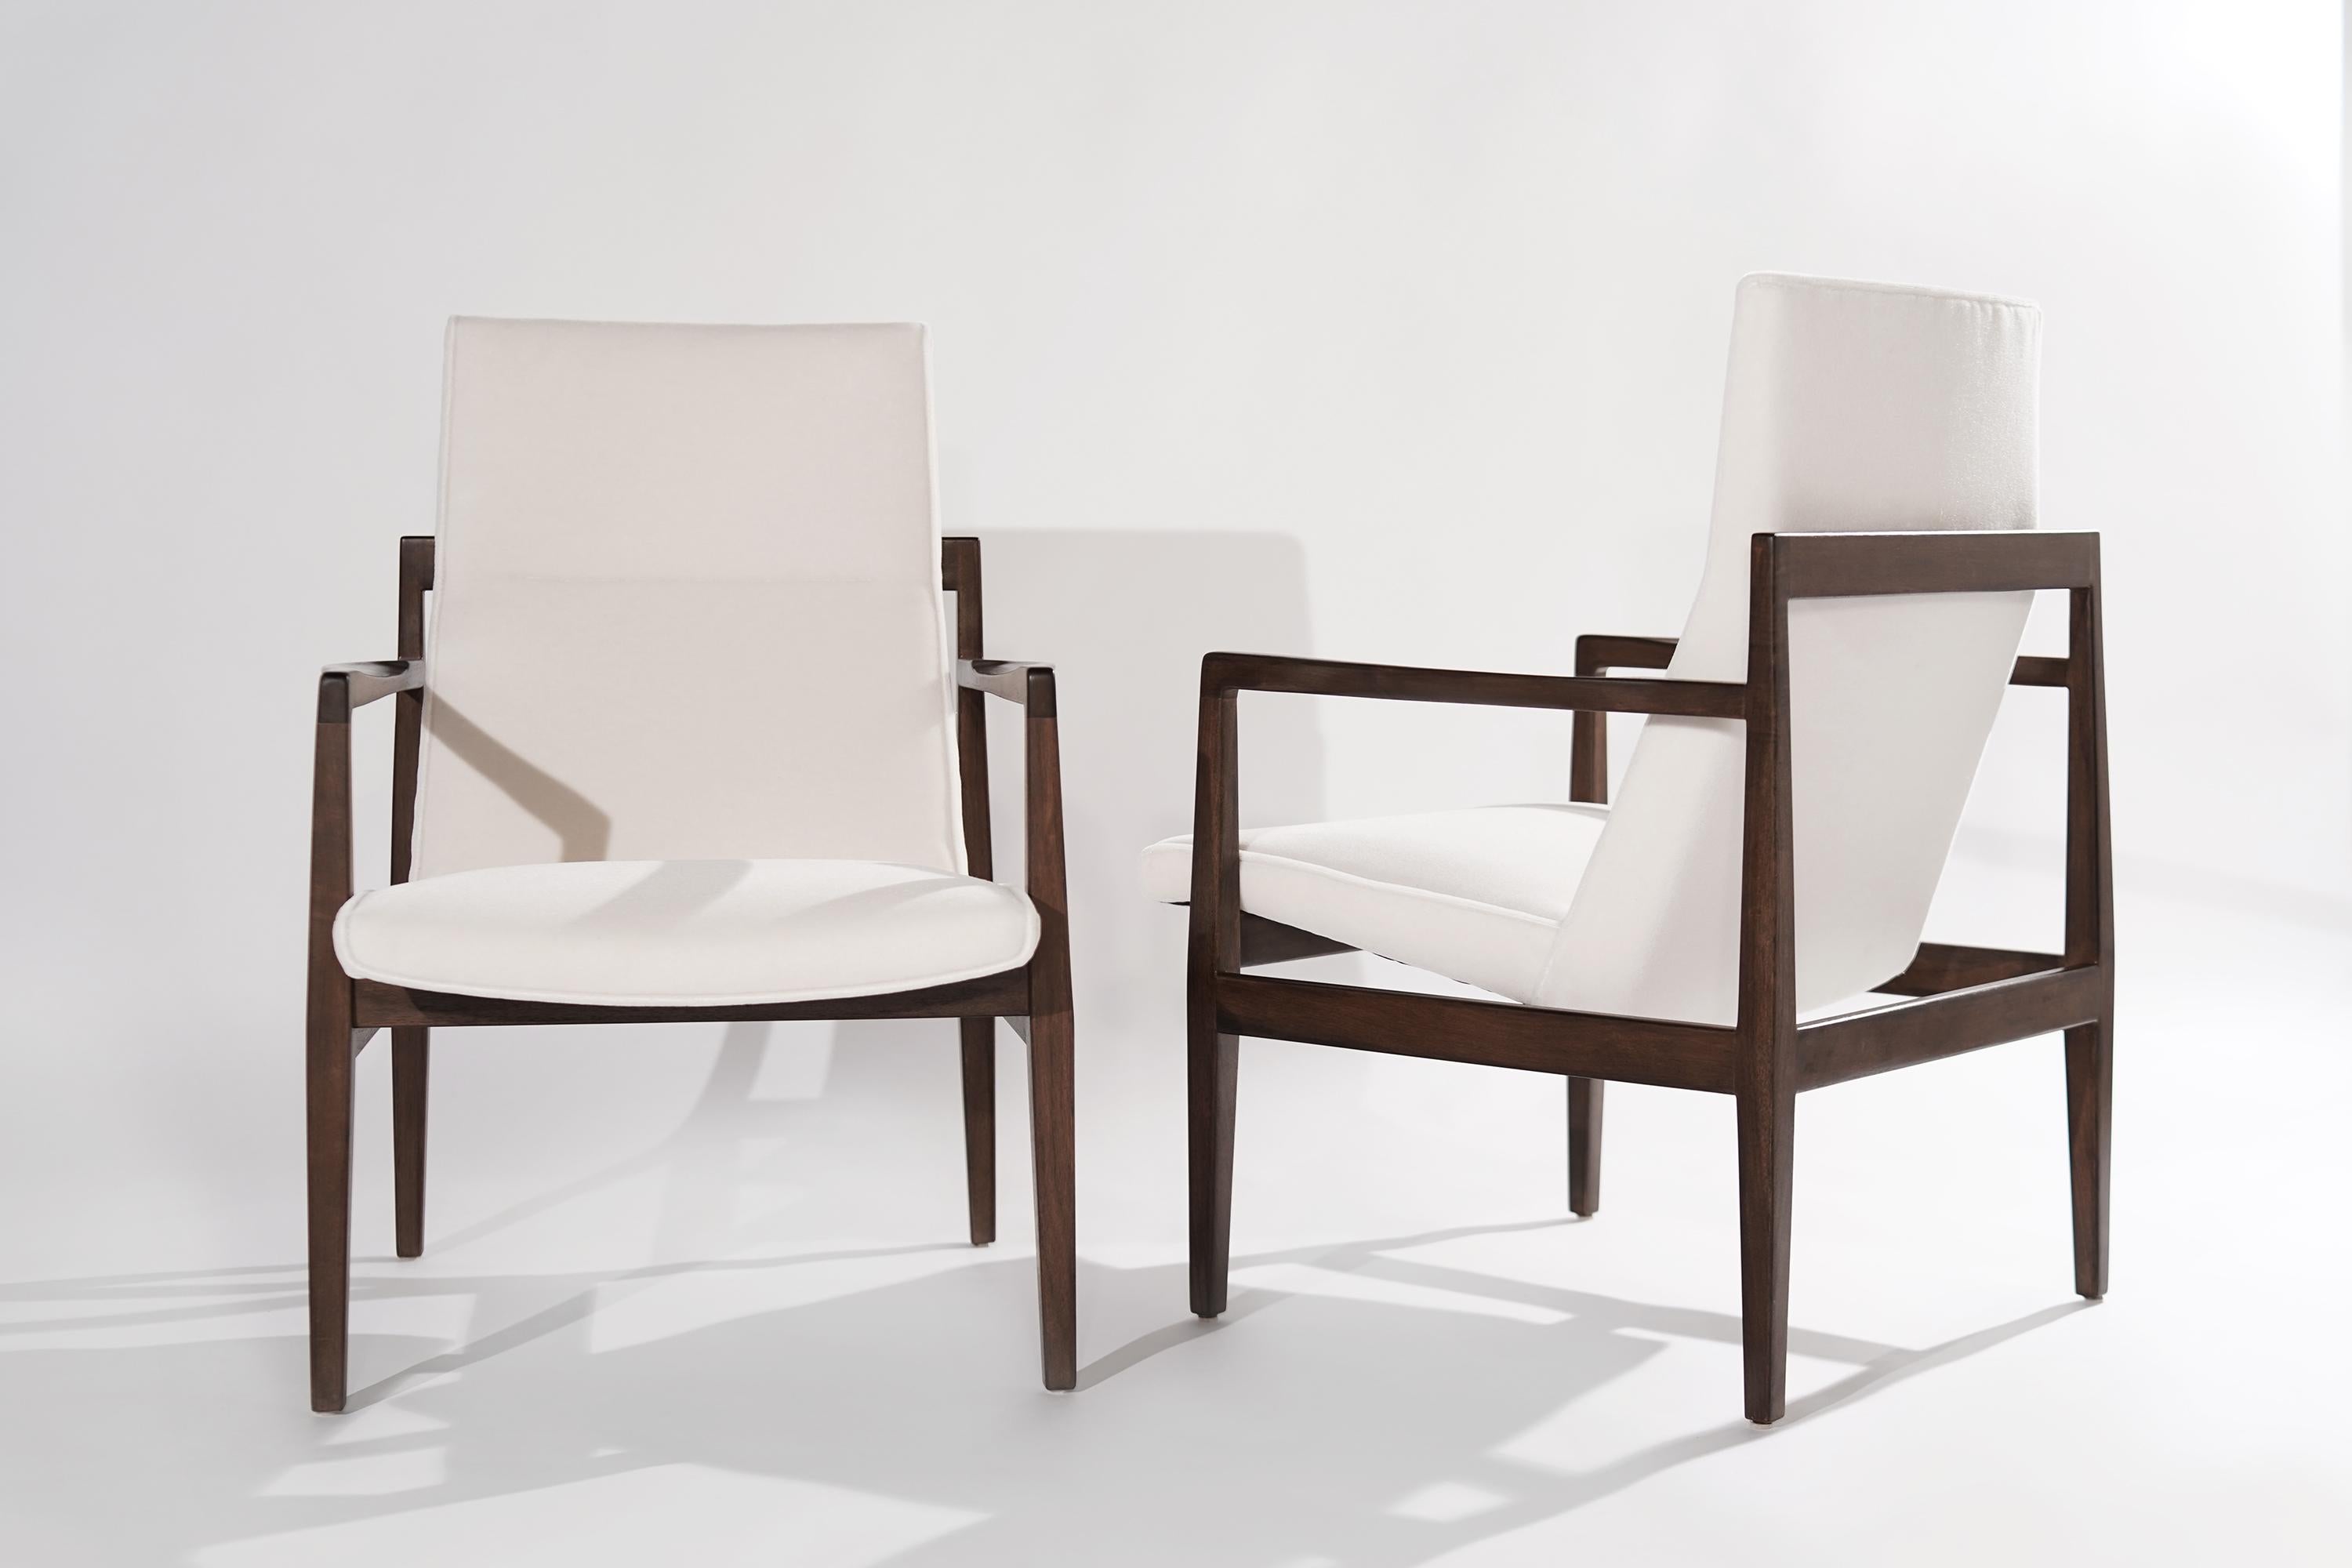 20th Century Set of Lounge Chairs by Jens Risom, c. 1960s